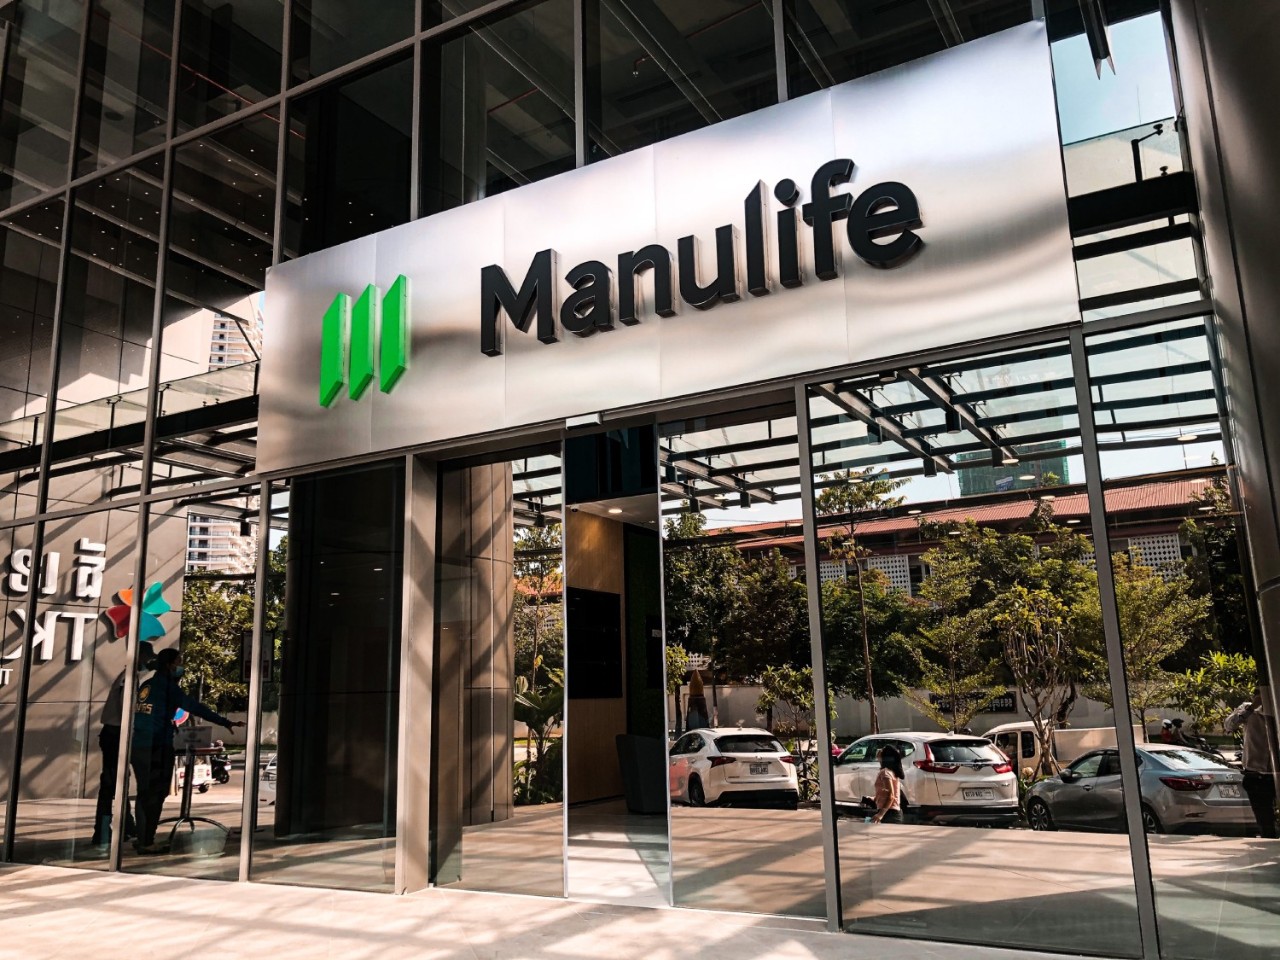 manulife cambodia - life insurance - new office - subpage - km